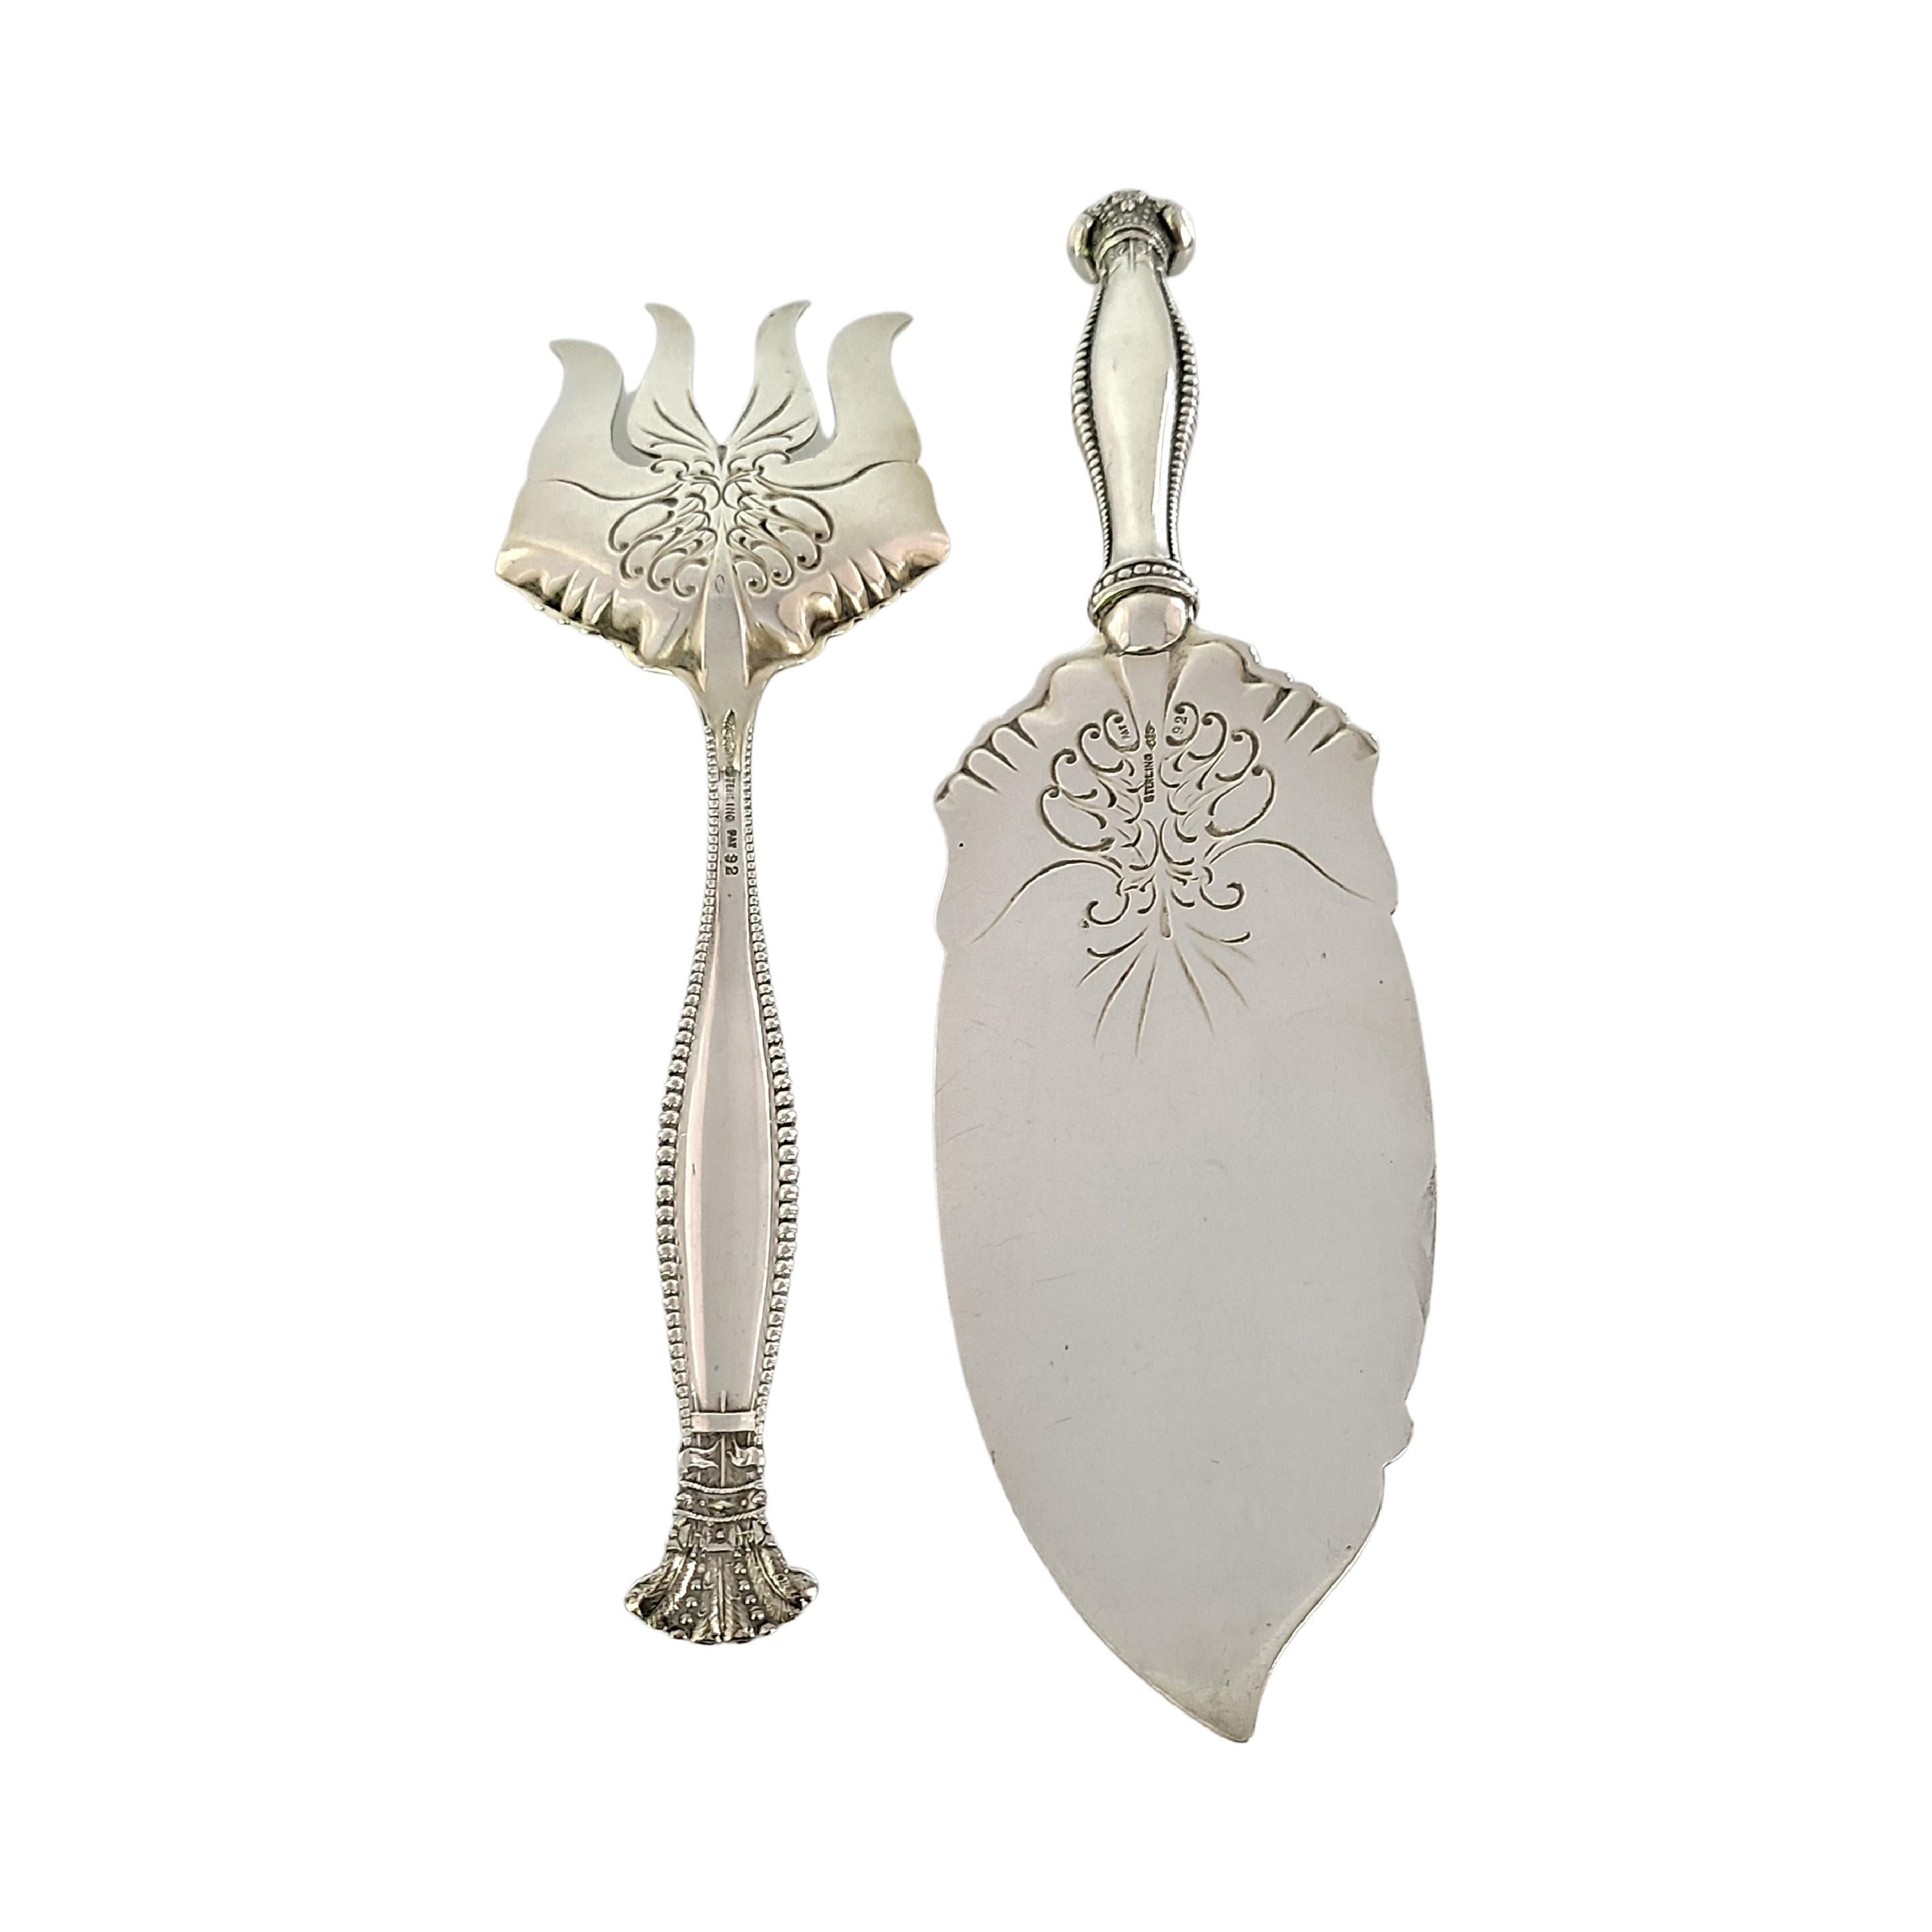 Sterling silver 2pc fish serving set in the Sandringham pattern by Georg Shiebler.

No monogram.

Beautifully ornate fish serving set including a fork and a serving knife/spatula. Beaded hollow handles, flourish design on both pieces.

Knife